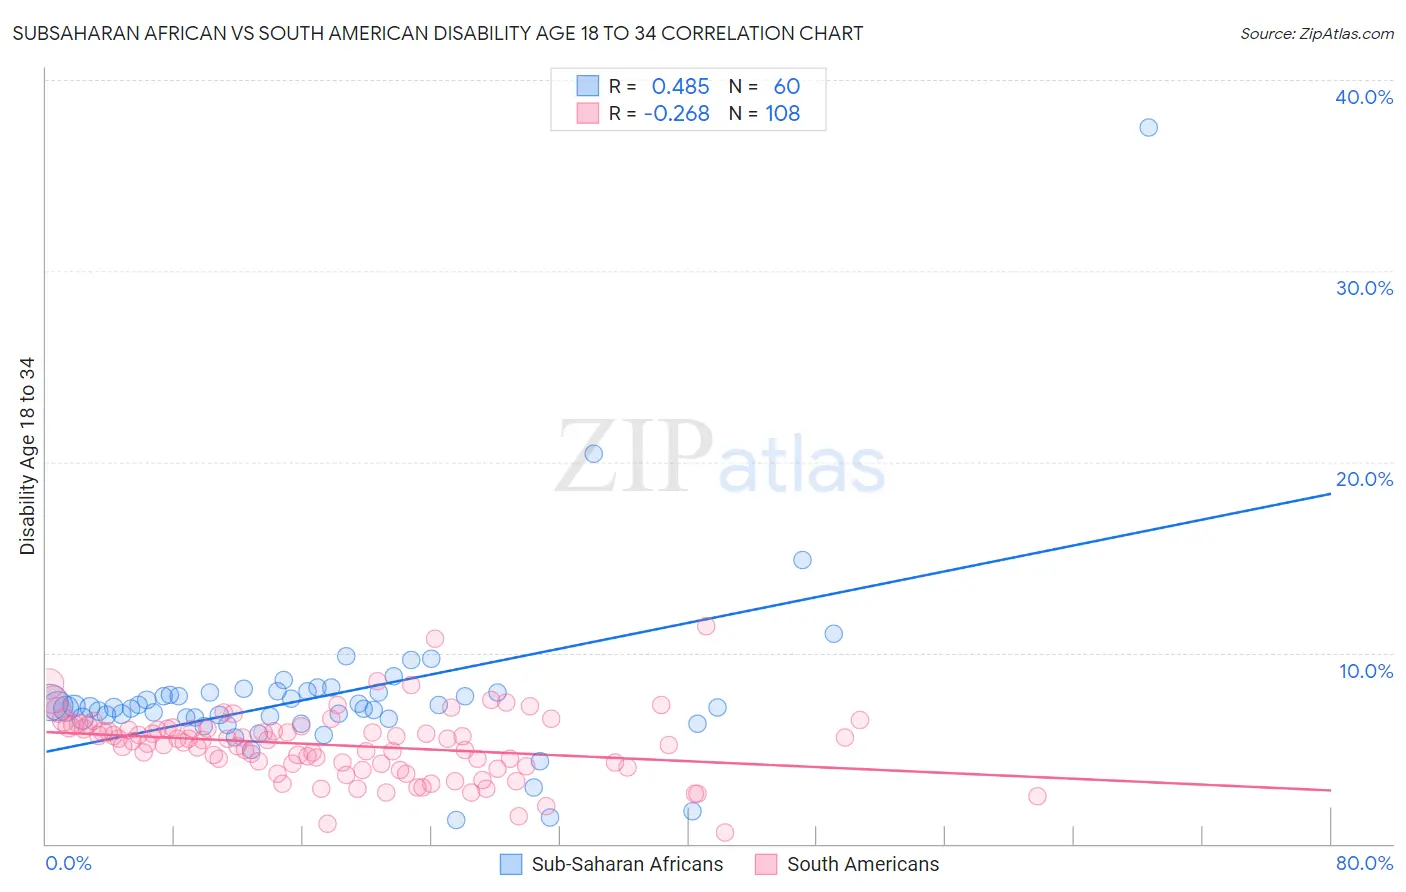 Subsaharan African vs South American Disability Age 18 to 34